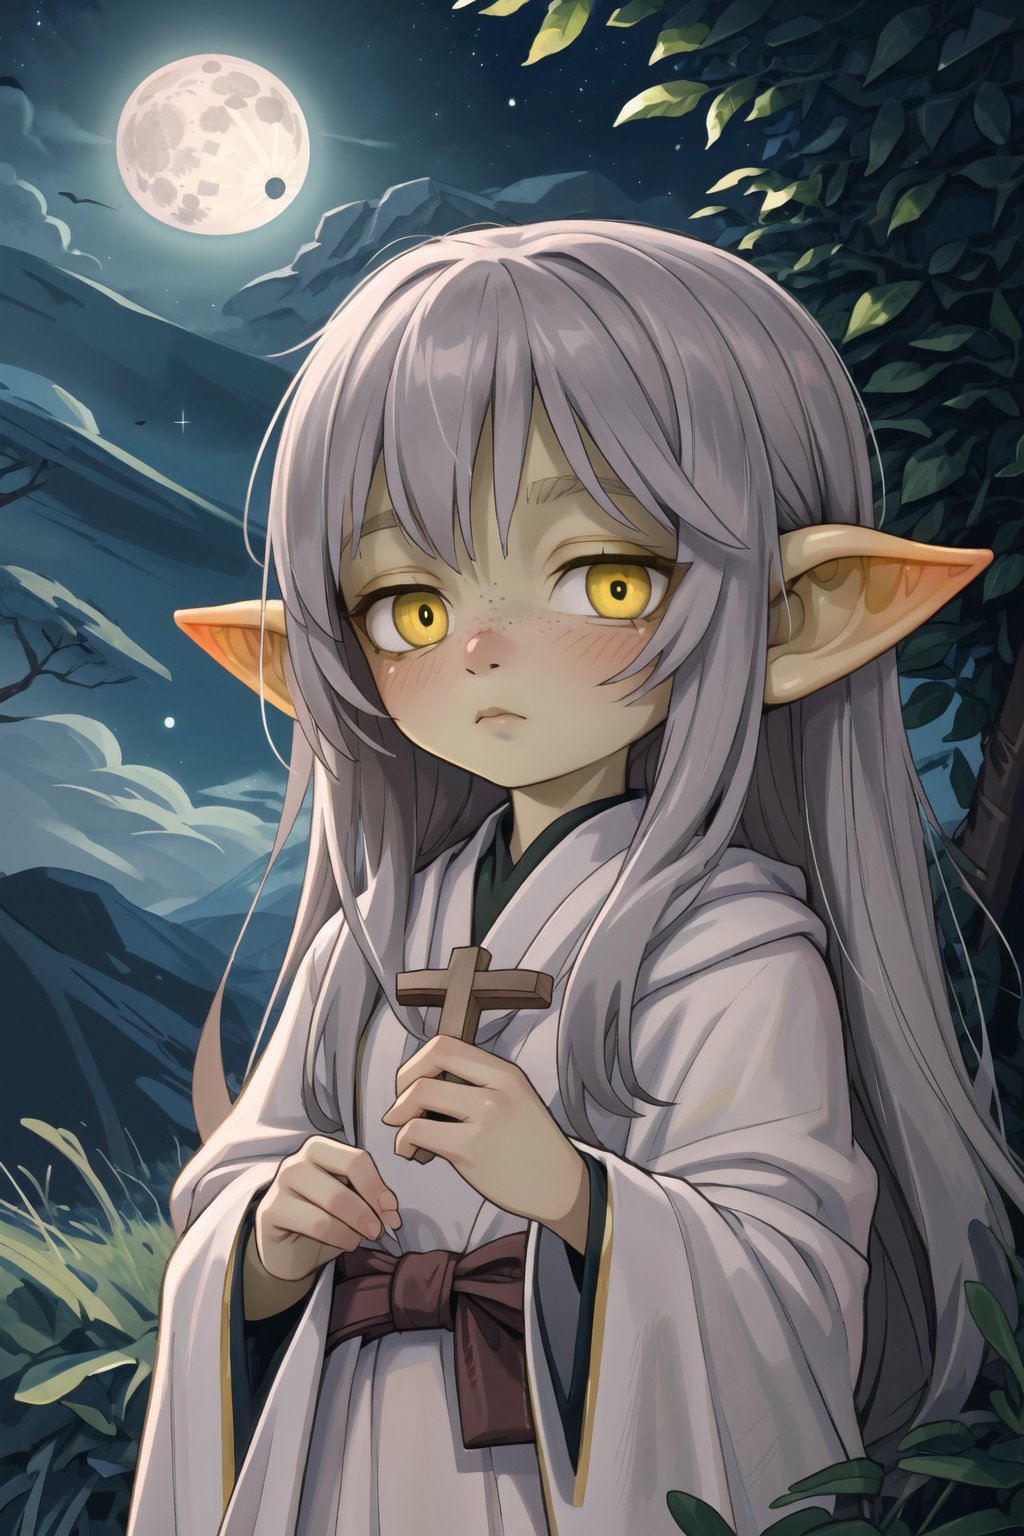 A whimsical green goblin maiden with a striking hime cut and long, gray hair. Her yellow eyes, revealing delicate freckles on her green skin. pointy ears add to her endearing features. The overall visual impact is strong, wearing white clerical robes. She gazes at the moon in a dark starry night while in a cliff under a tree, looking away